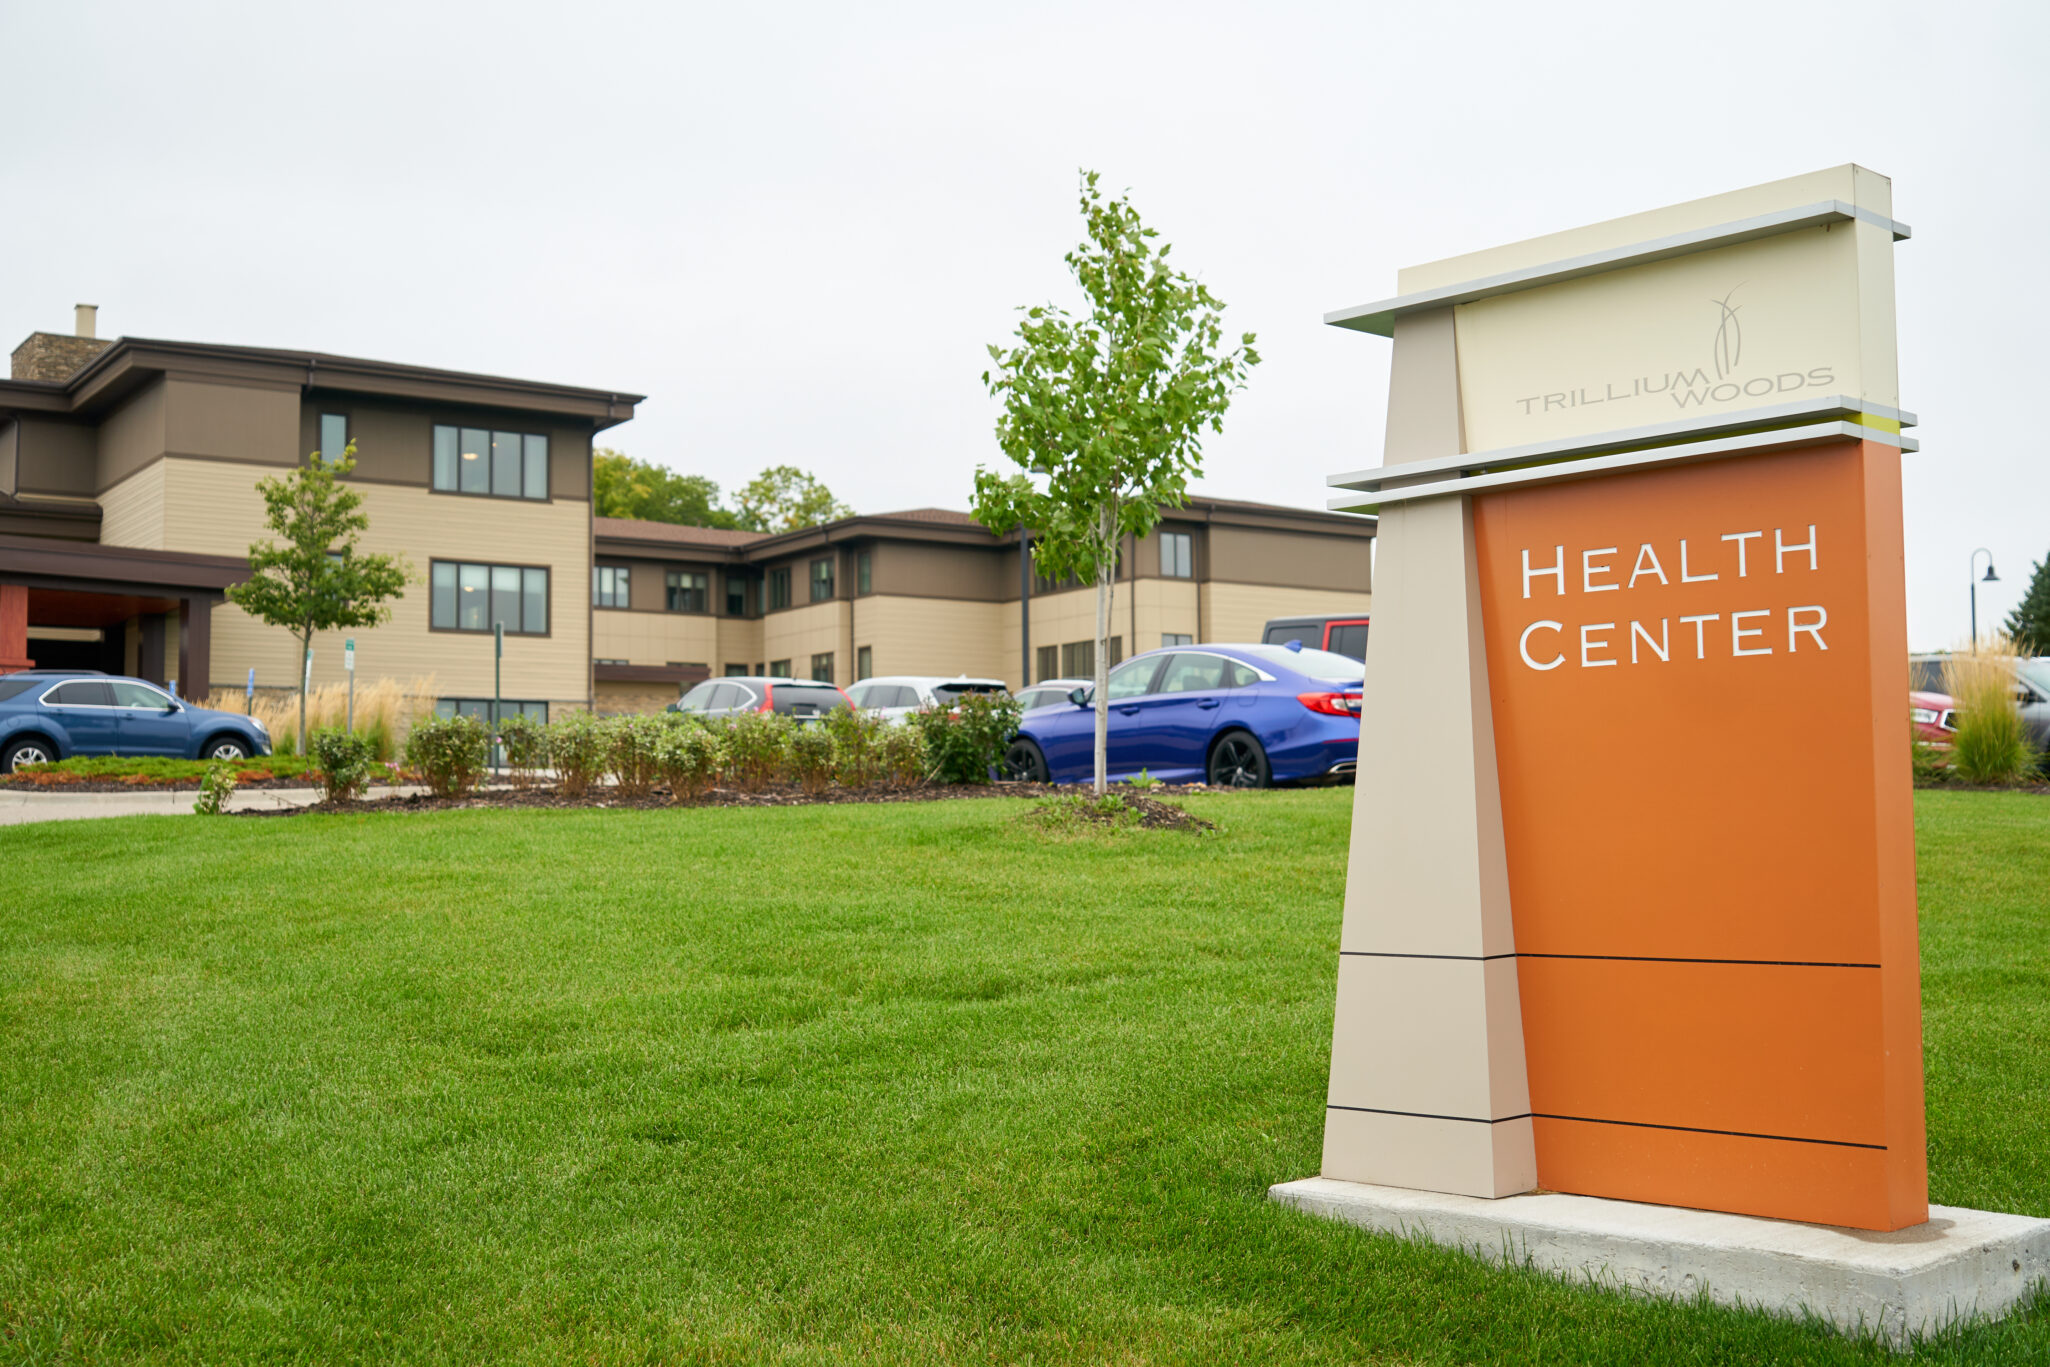 Trillium Woods Birches Health Center Earns Five Stars in All Categories